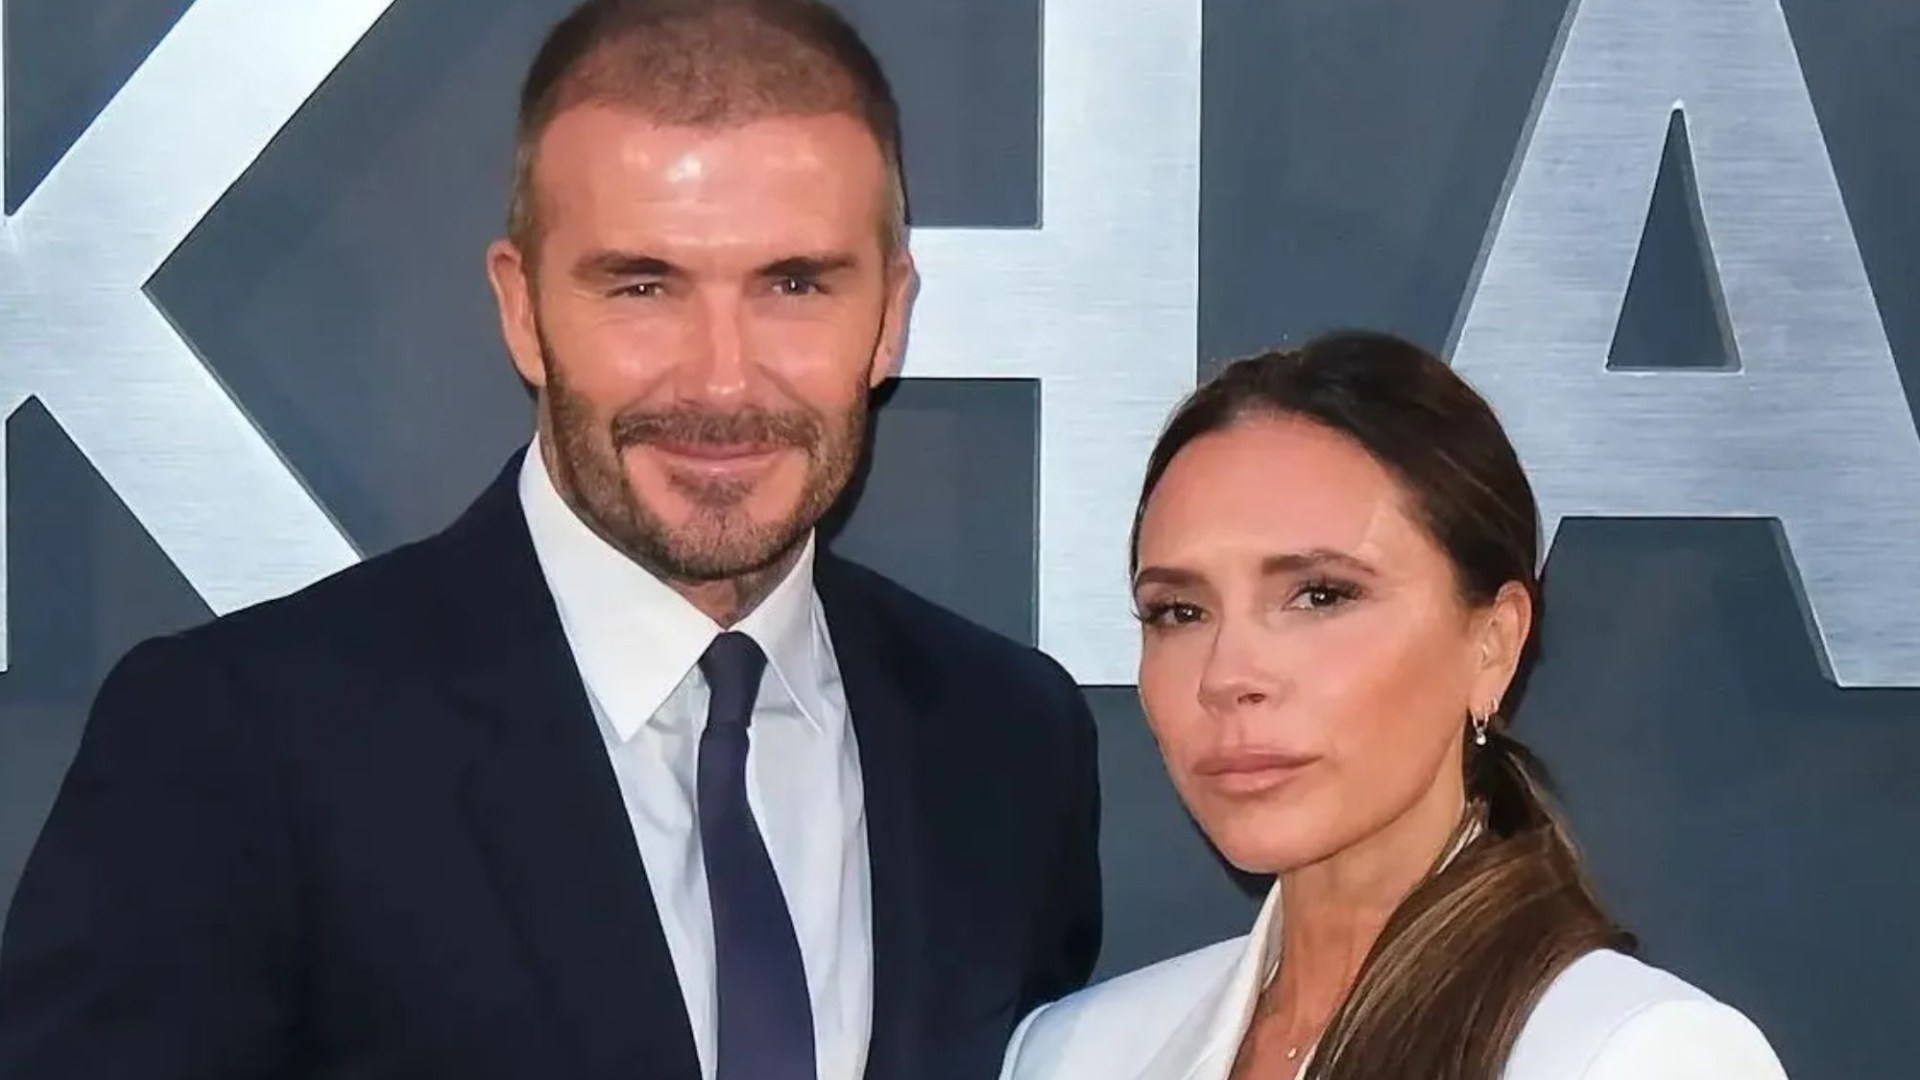 David Beckham poised to claim unexpected accolade following Netflix show with Victoria and family